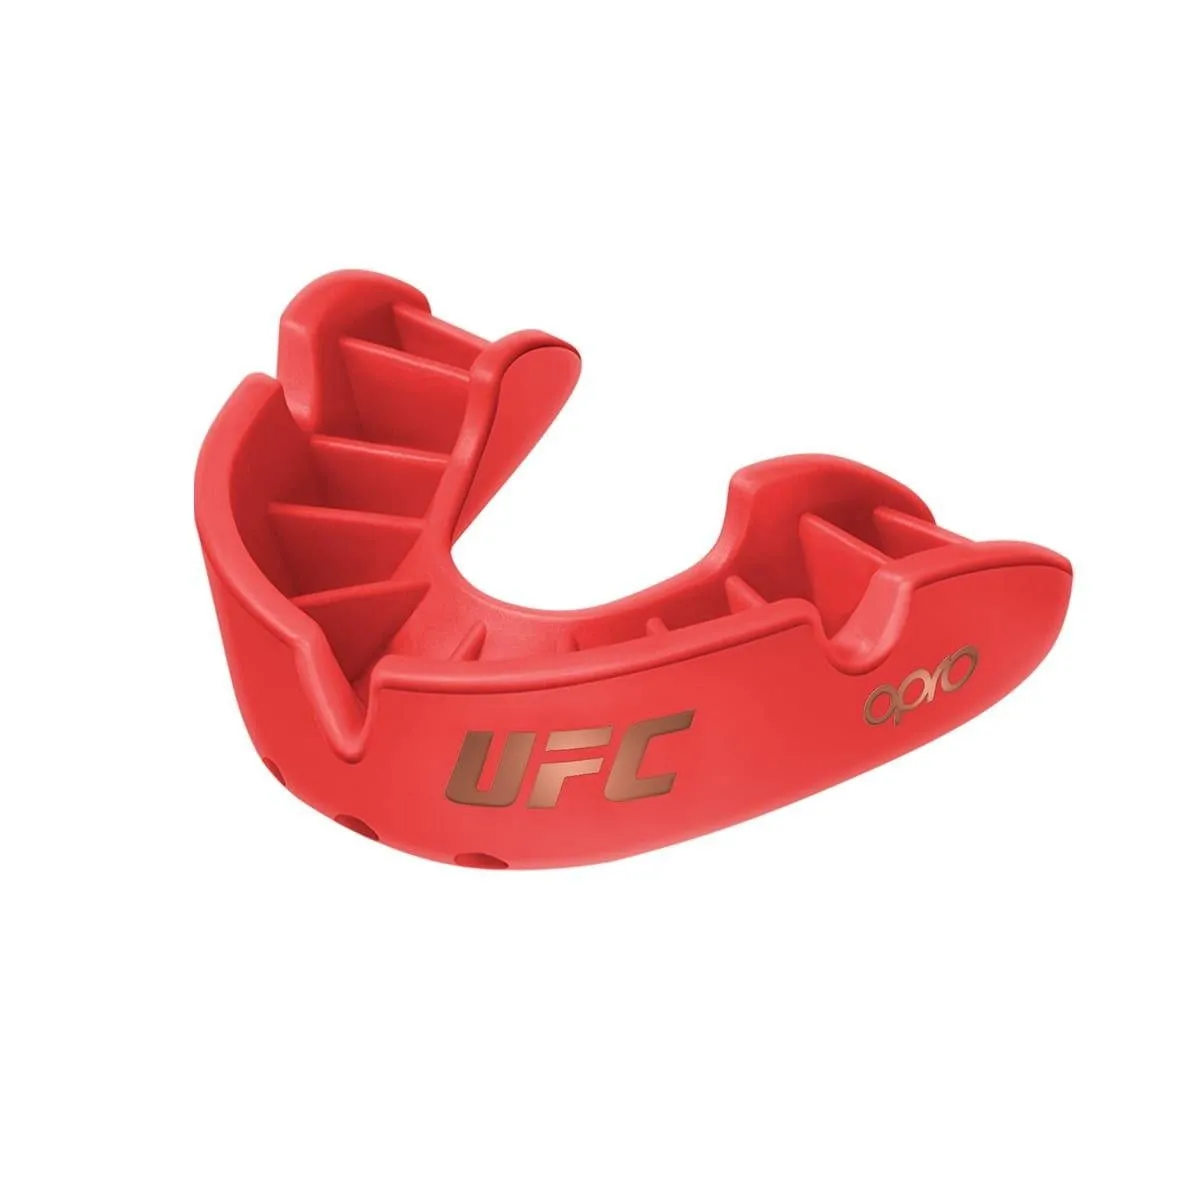 OPRO "UFC" mouthguard bronze 2022 red